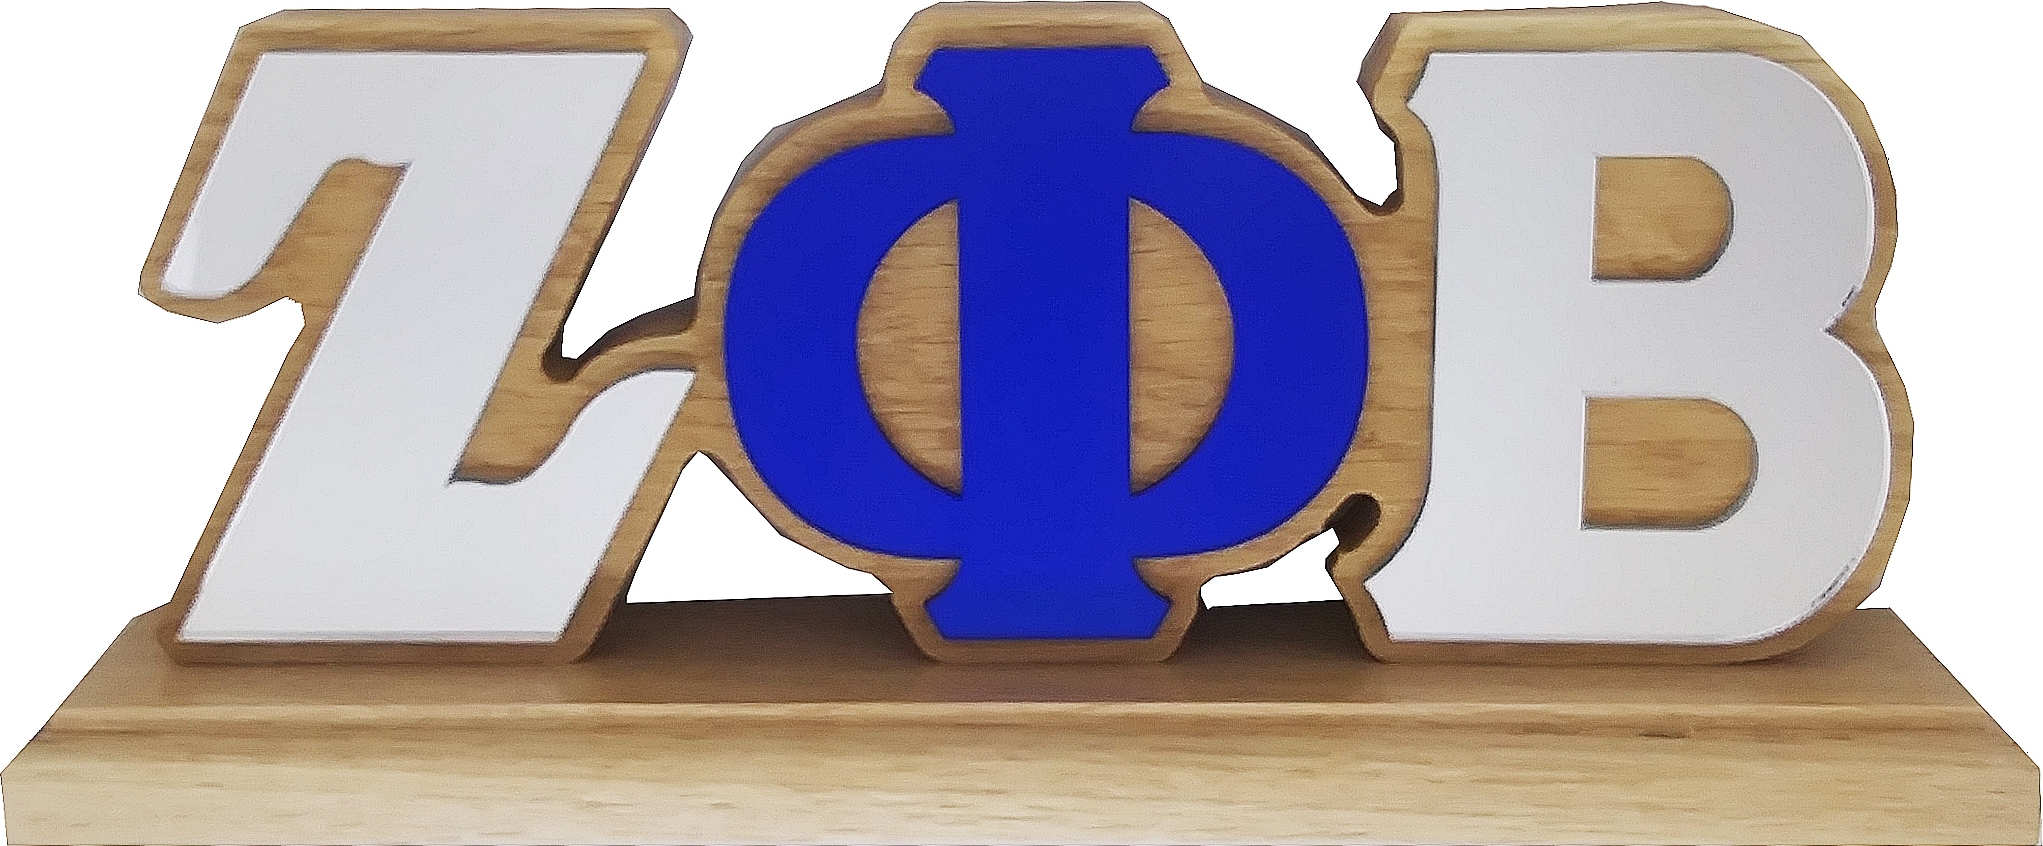 Zeta Phi Beta Wood Desk Top Letters With Color Base [Brown - 11